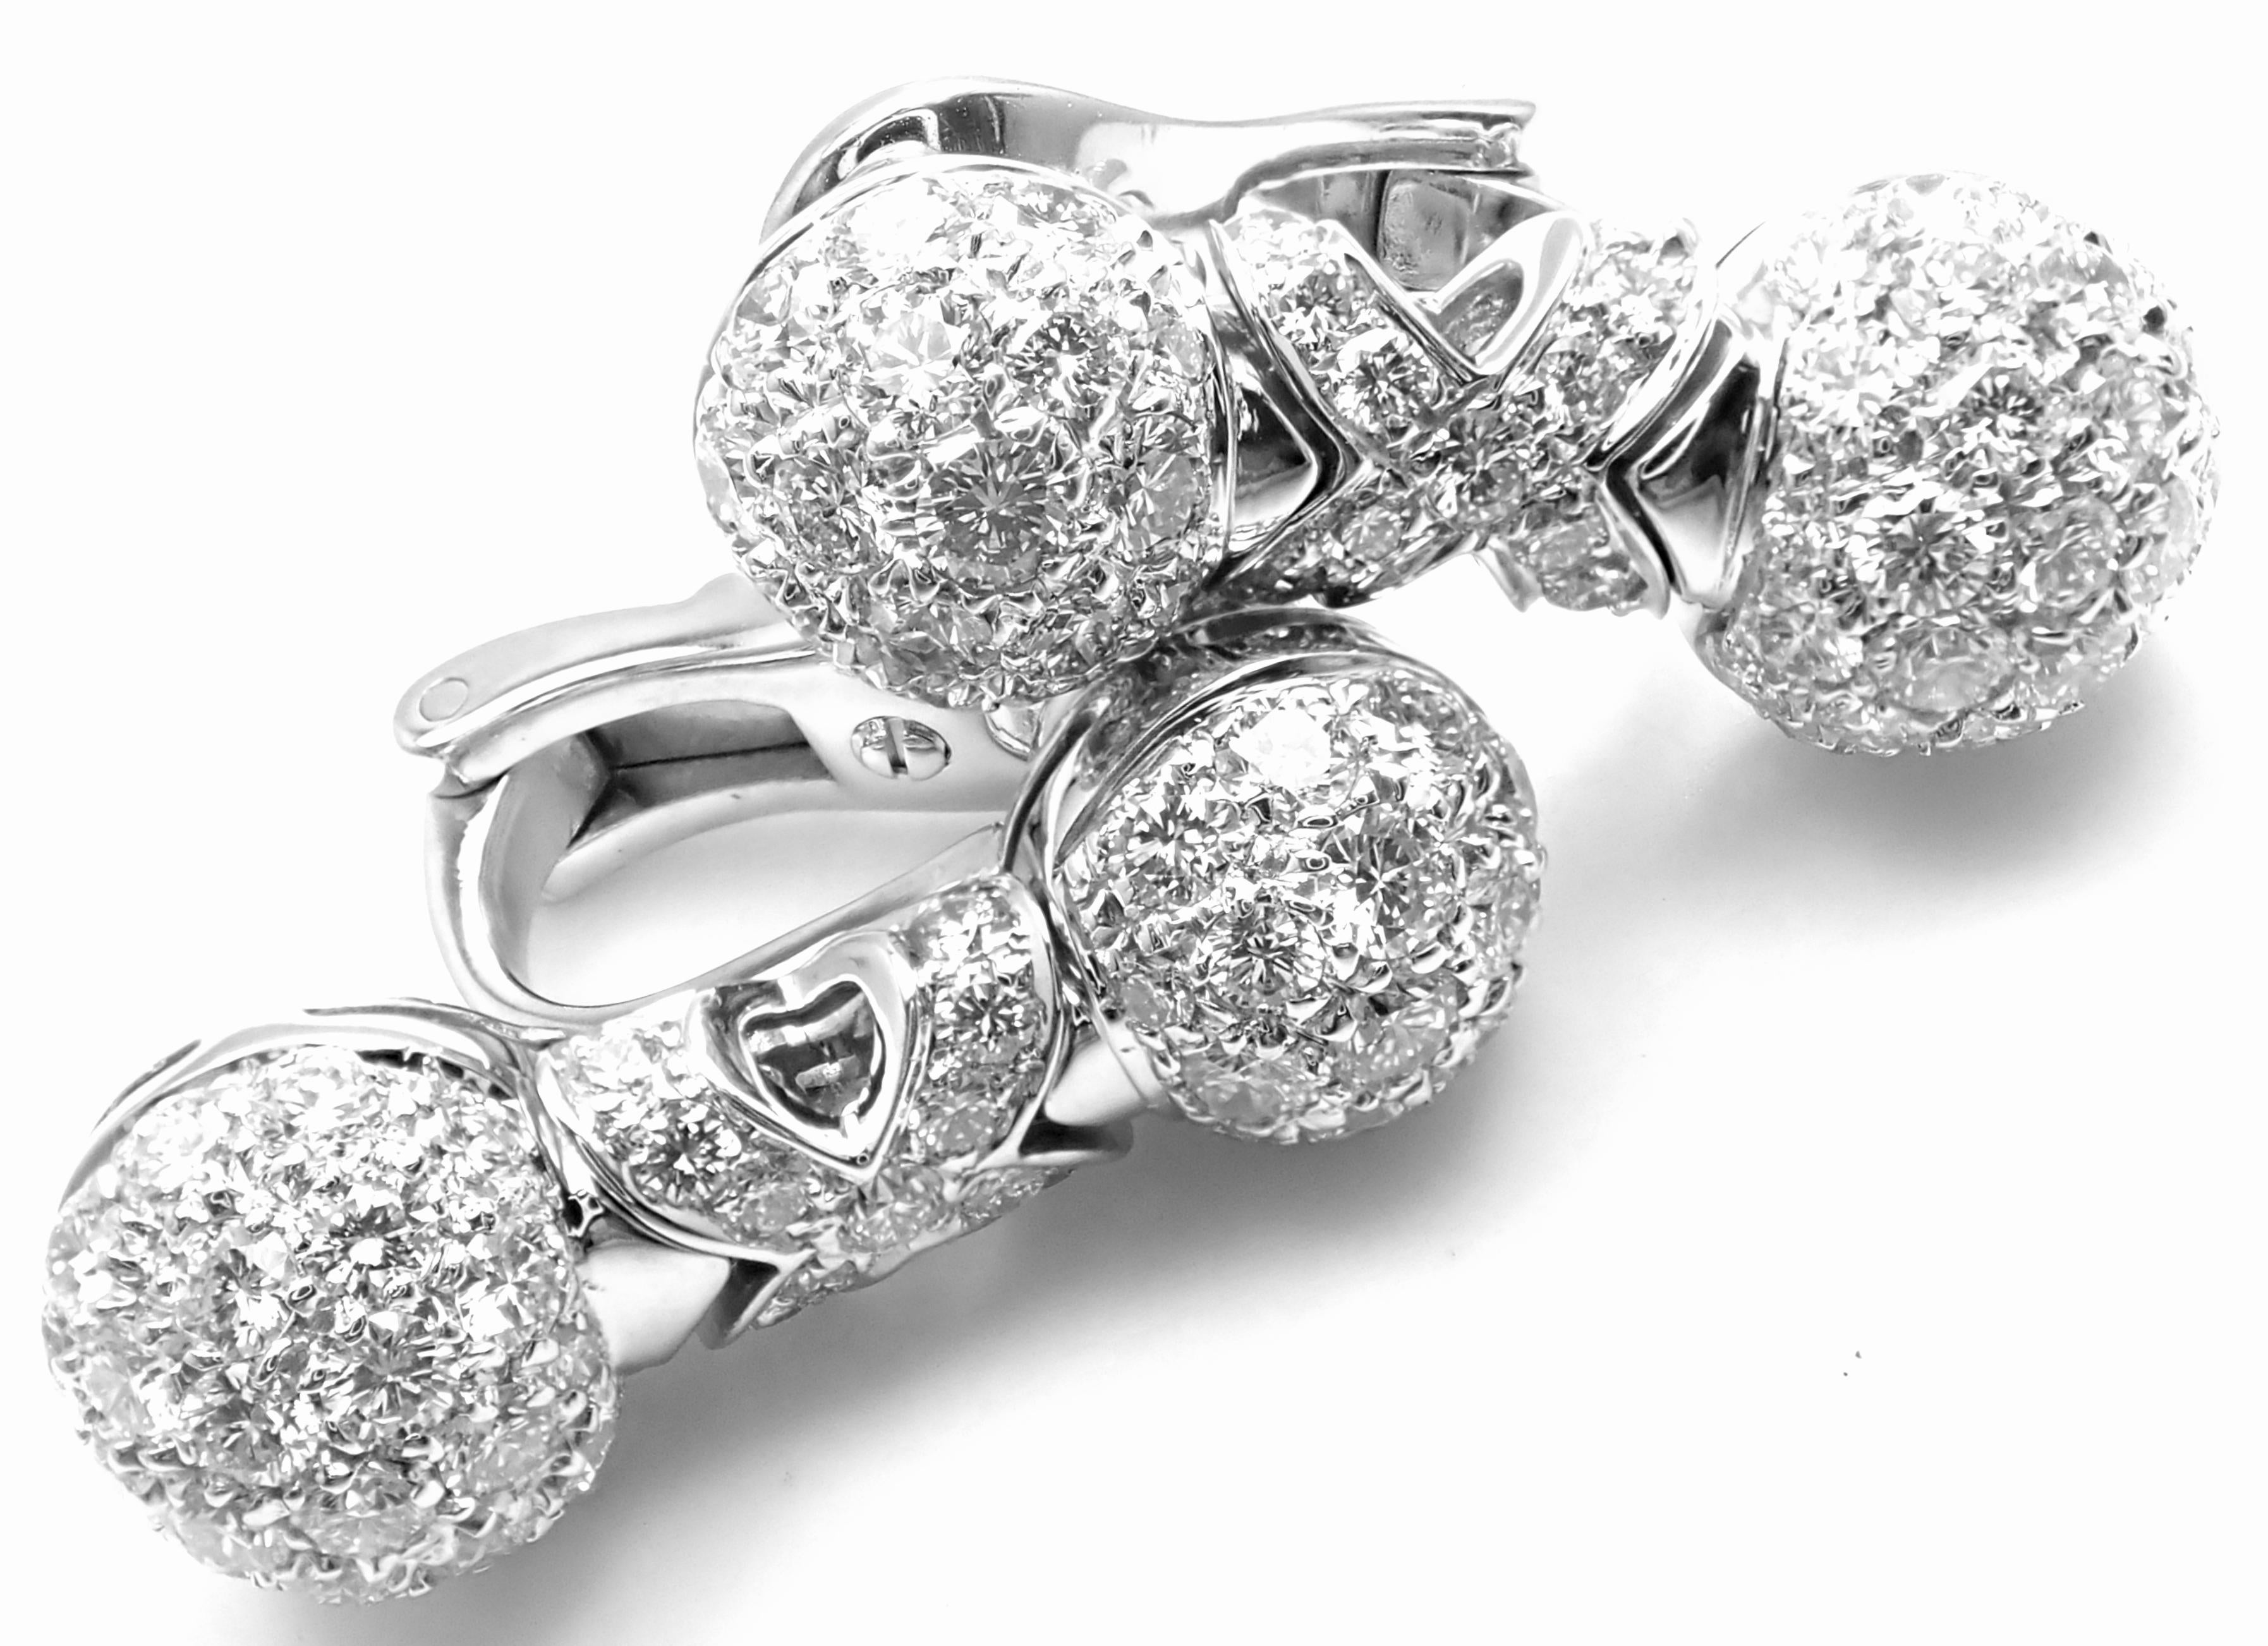 18k White Gold Diamond Earrings by Bulgari. 
With 106 round brilliant cut diamonds VS1 clarity G color total weight approx. 2.5ct
Details:
Measurements: 25mm x 10mm
Weight: 14.1 grams
Stamped Hallmarks: Bvlgari, 750, 2337AL, Made In Italy
*Free